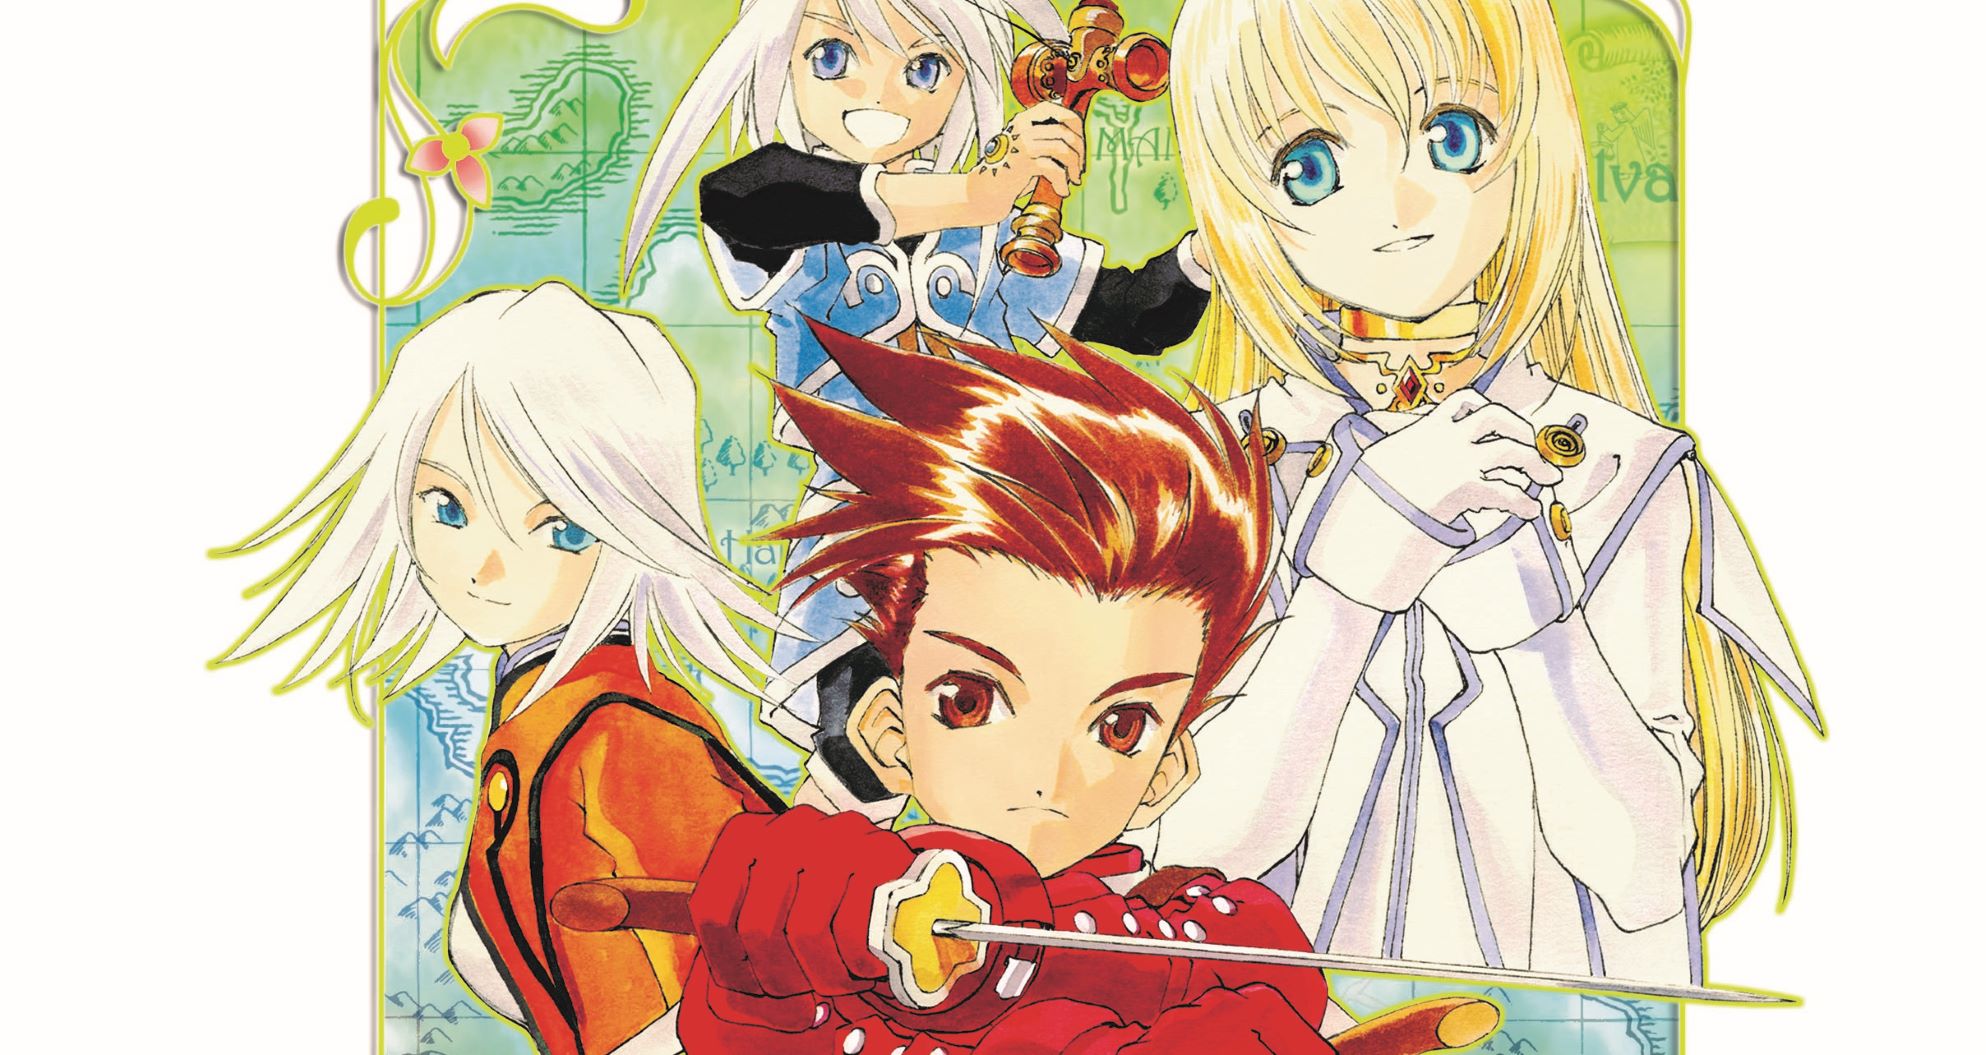 Annunciato Tales of Symphonia Remastered